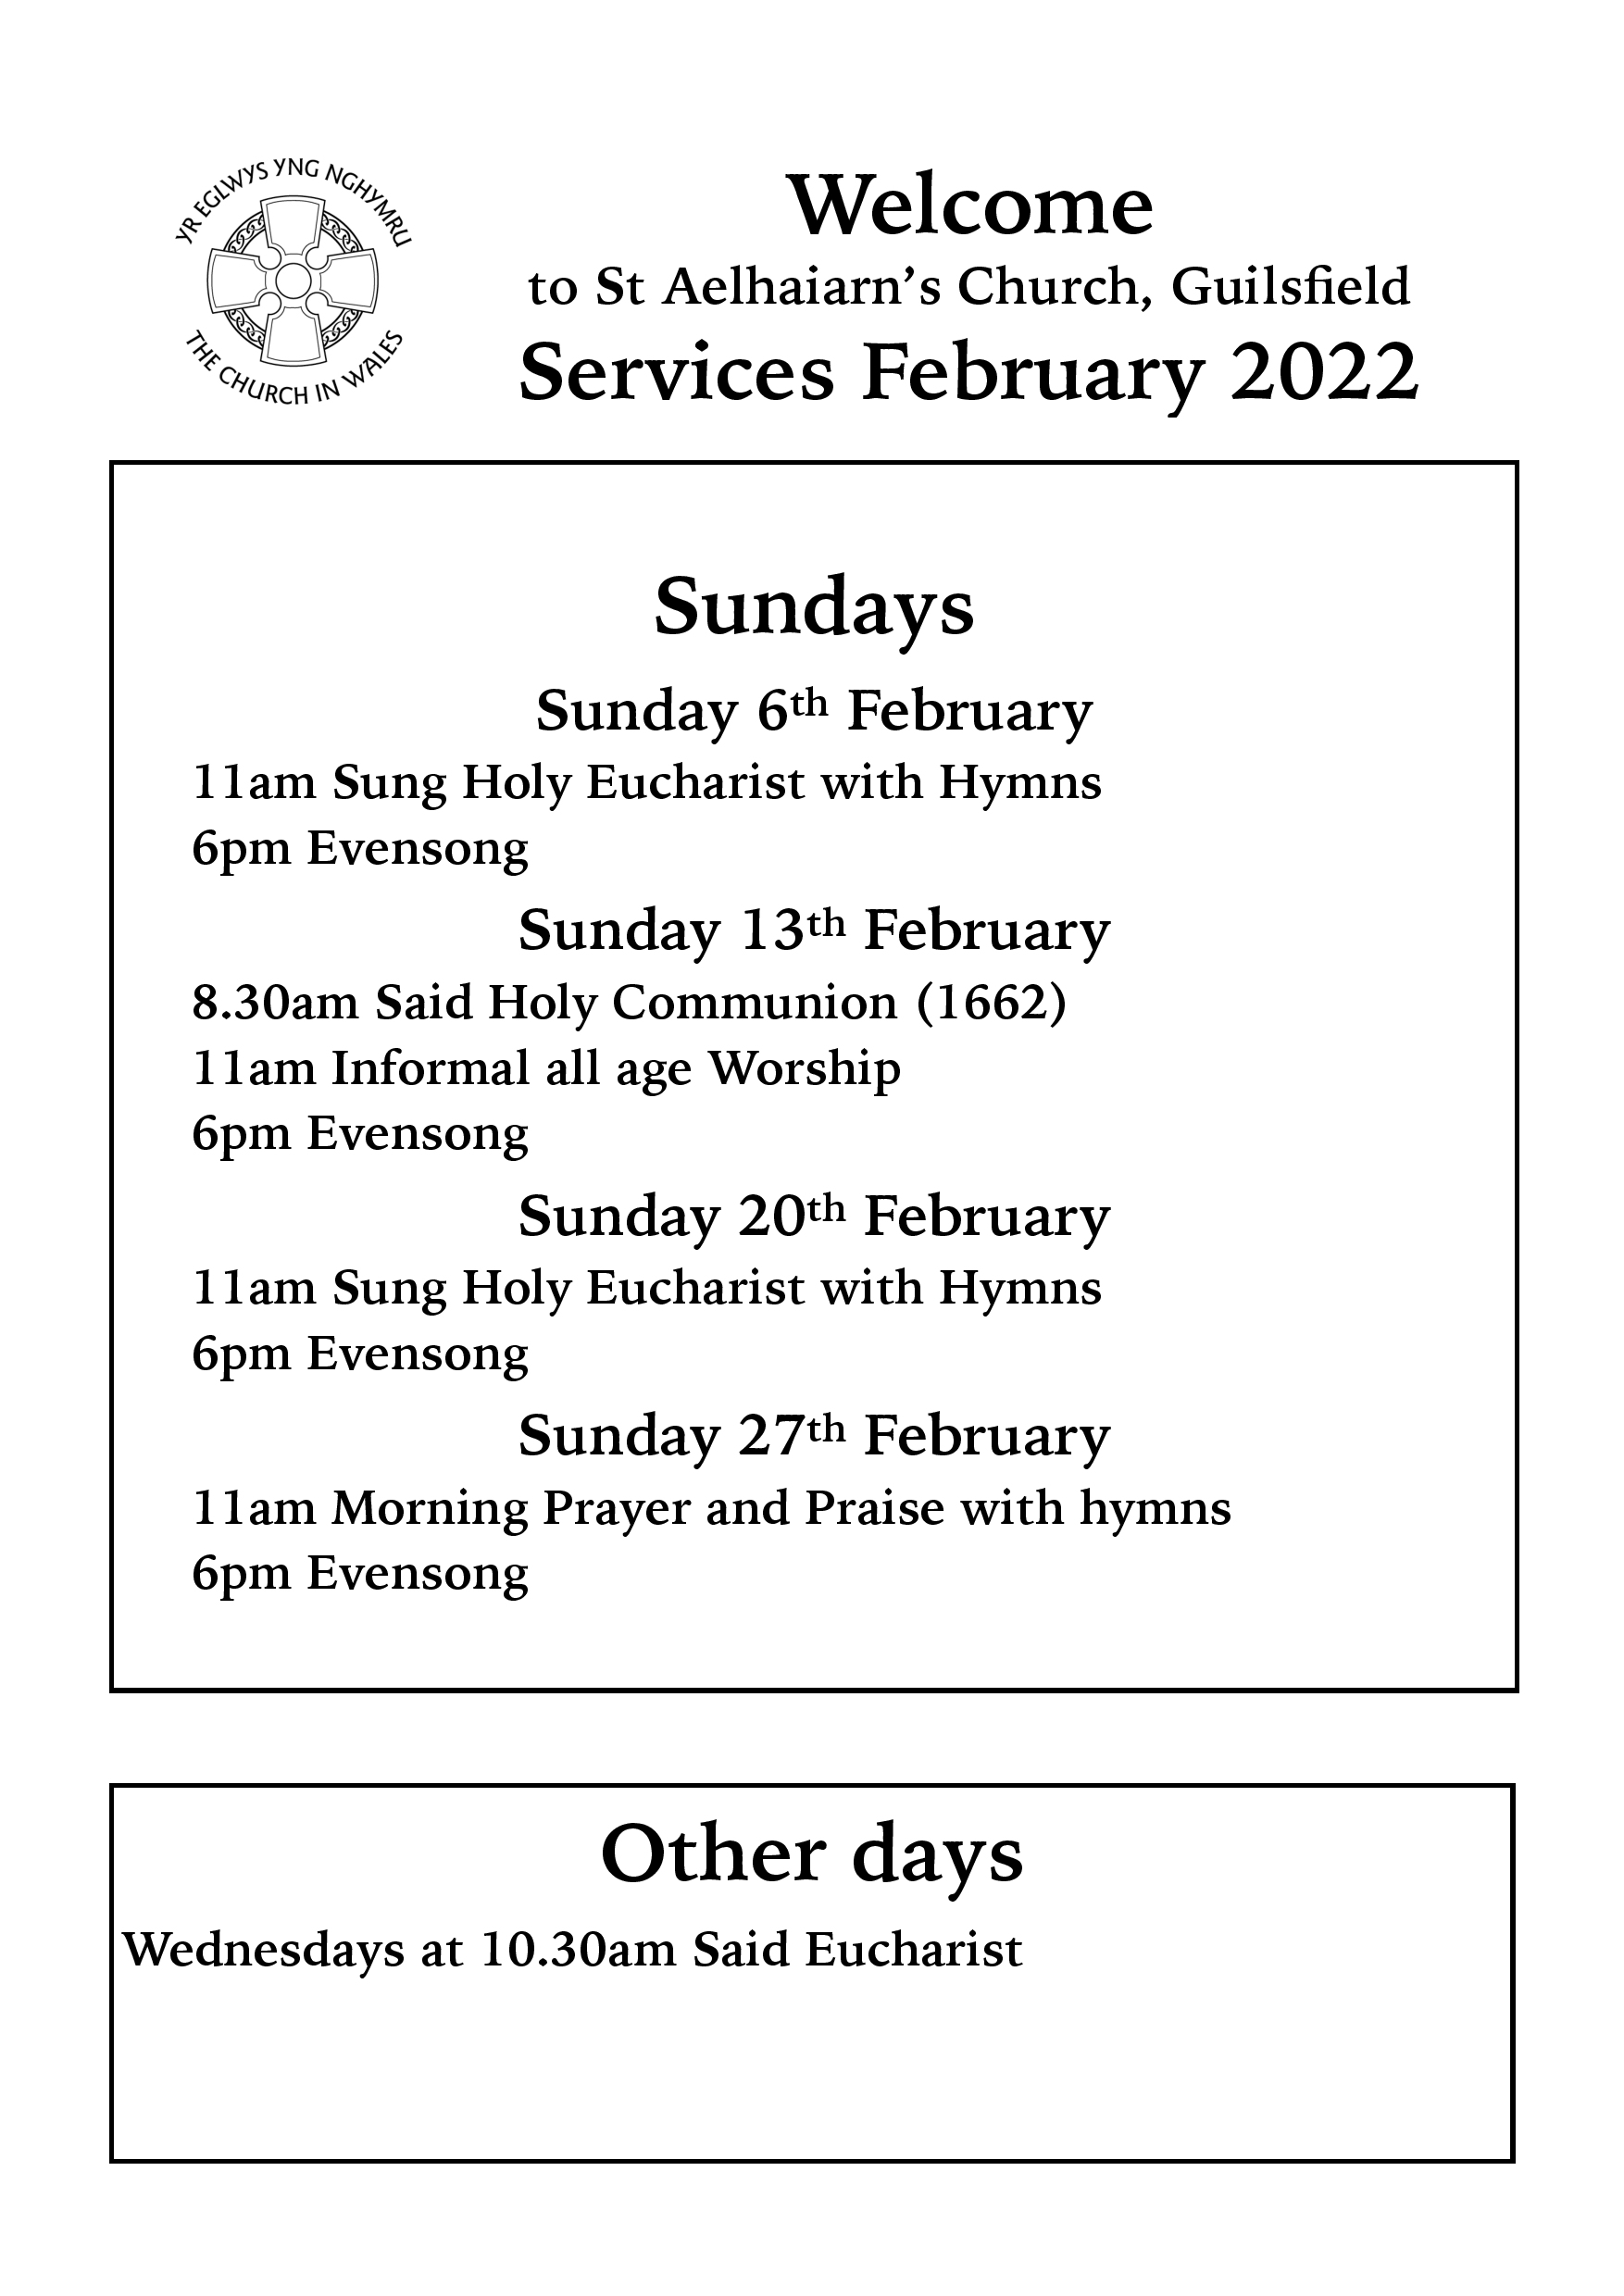 February Services